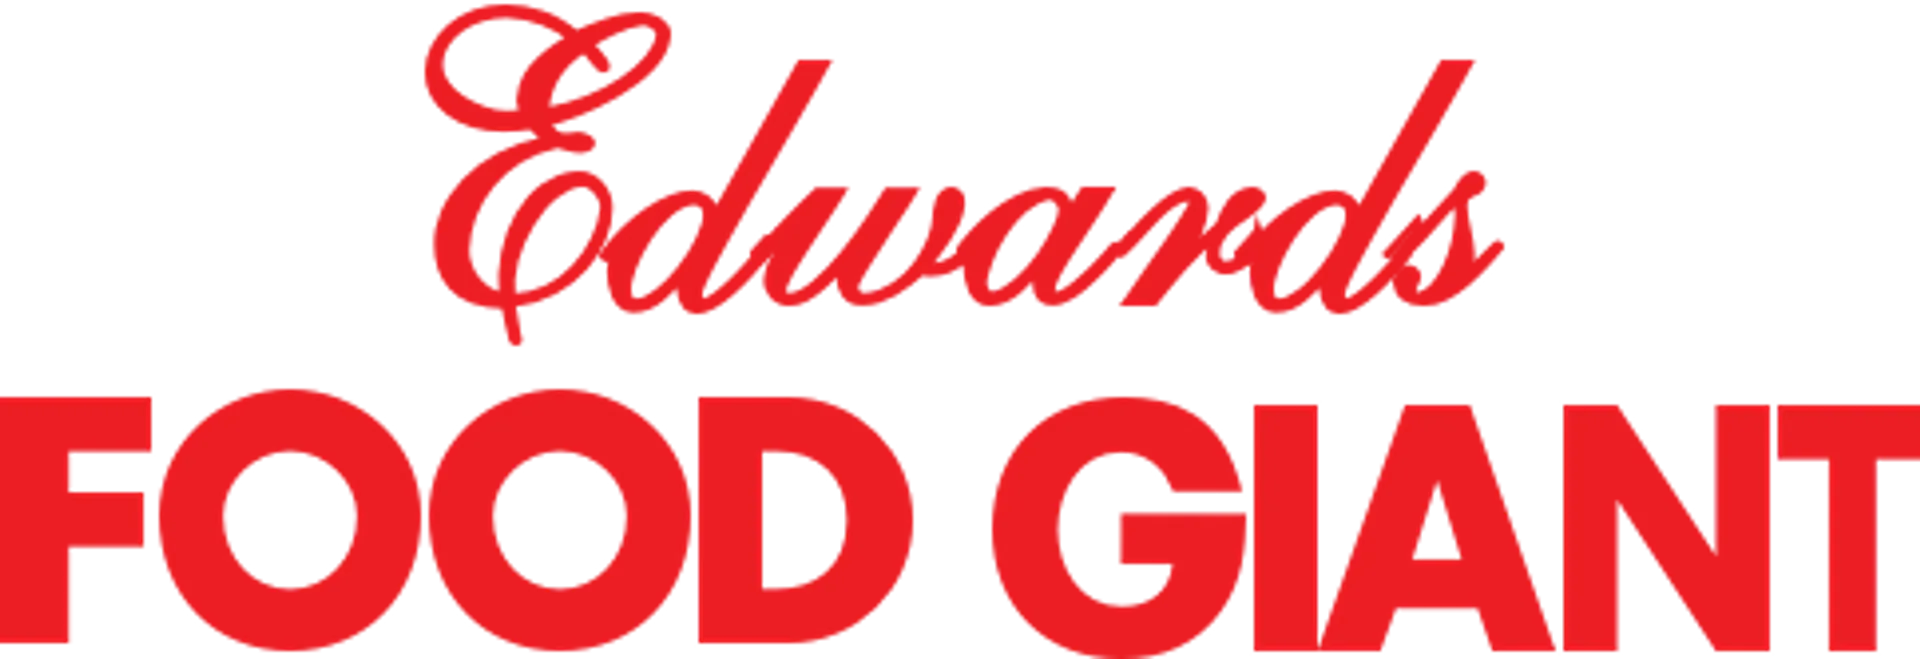 EDWARDS FOOD GIANT logo. Current weekly ad